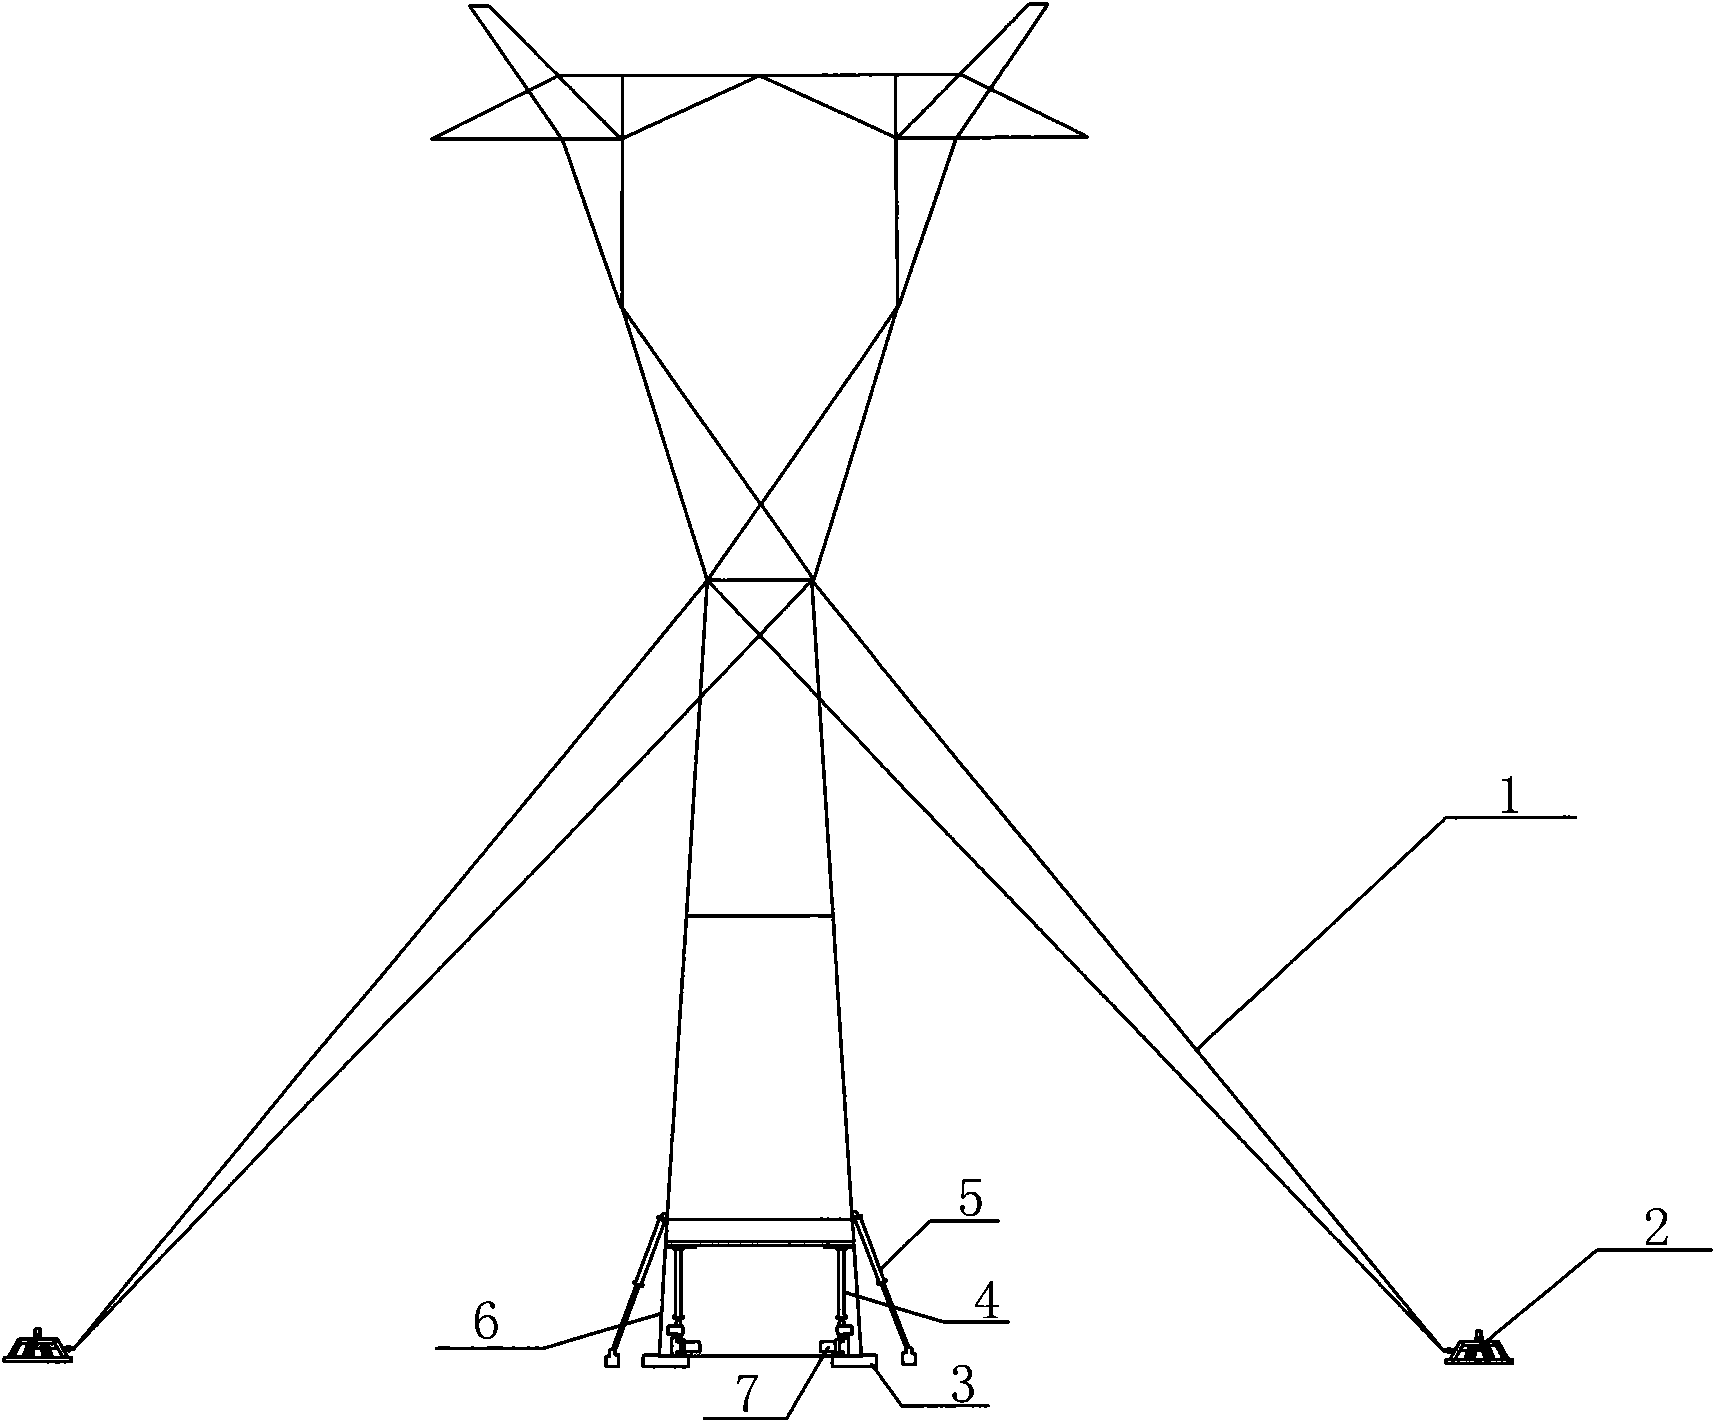 Device arranged on original foundation of high voltage transmission tower and capable of hoisting height of tower and preventing mining-induced deformation